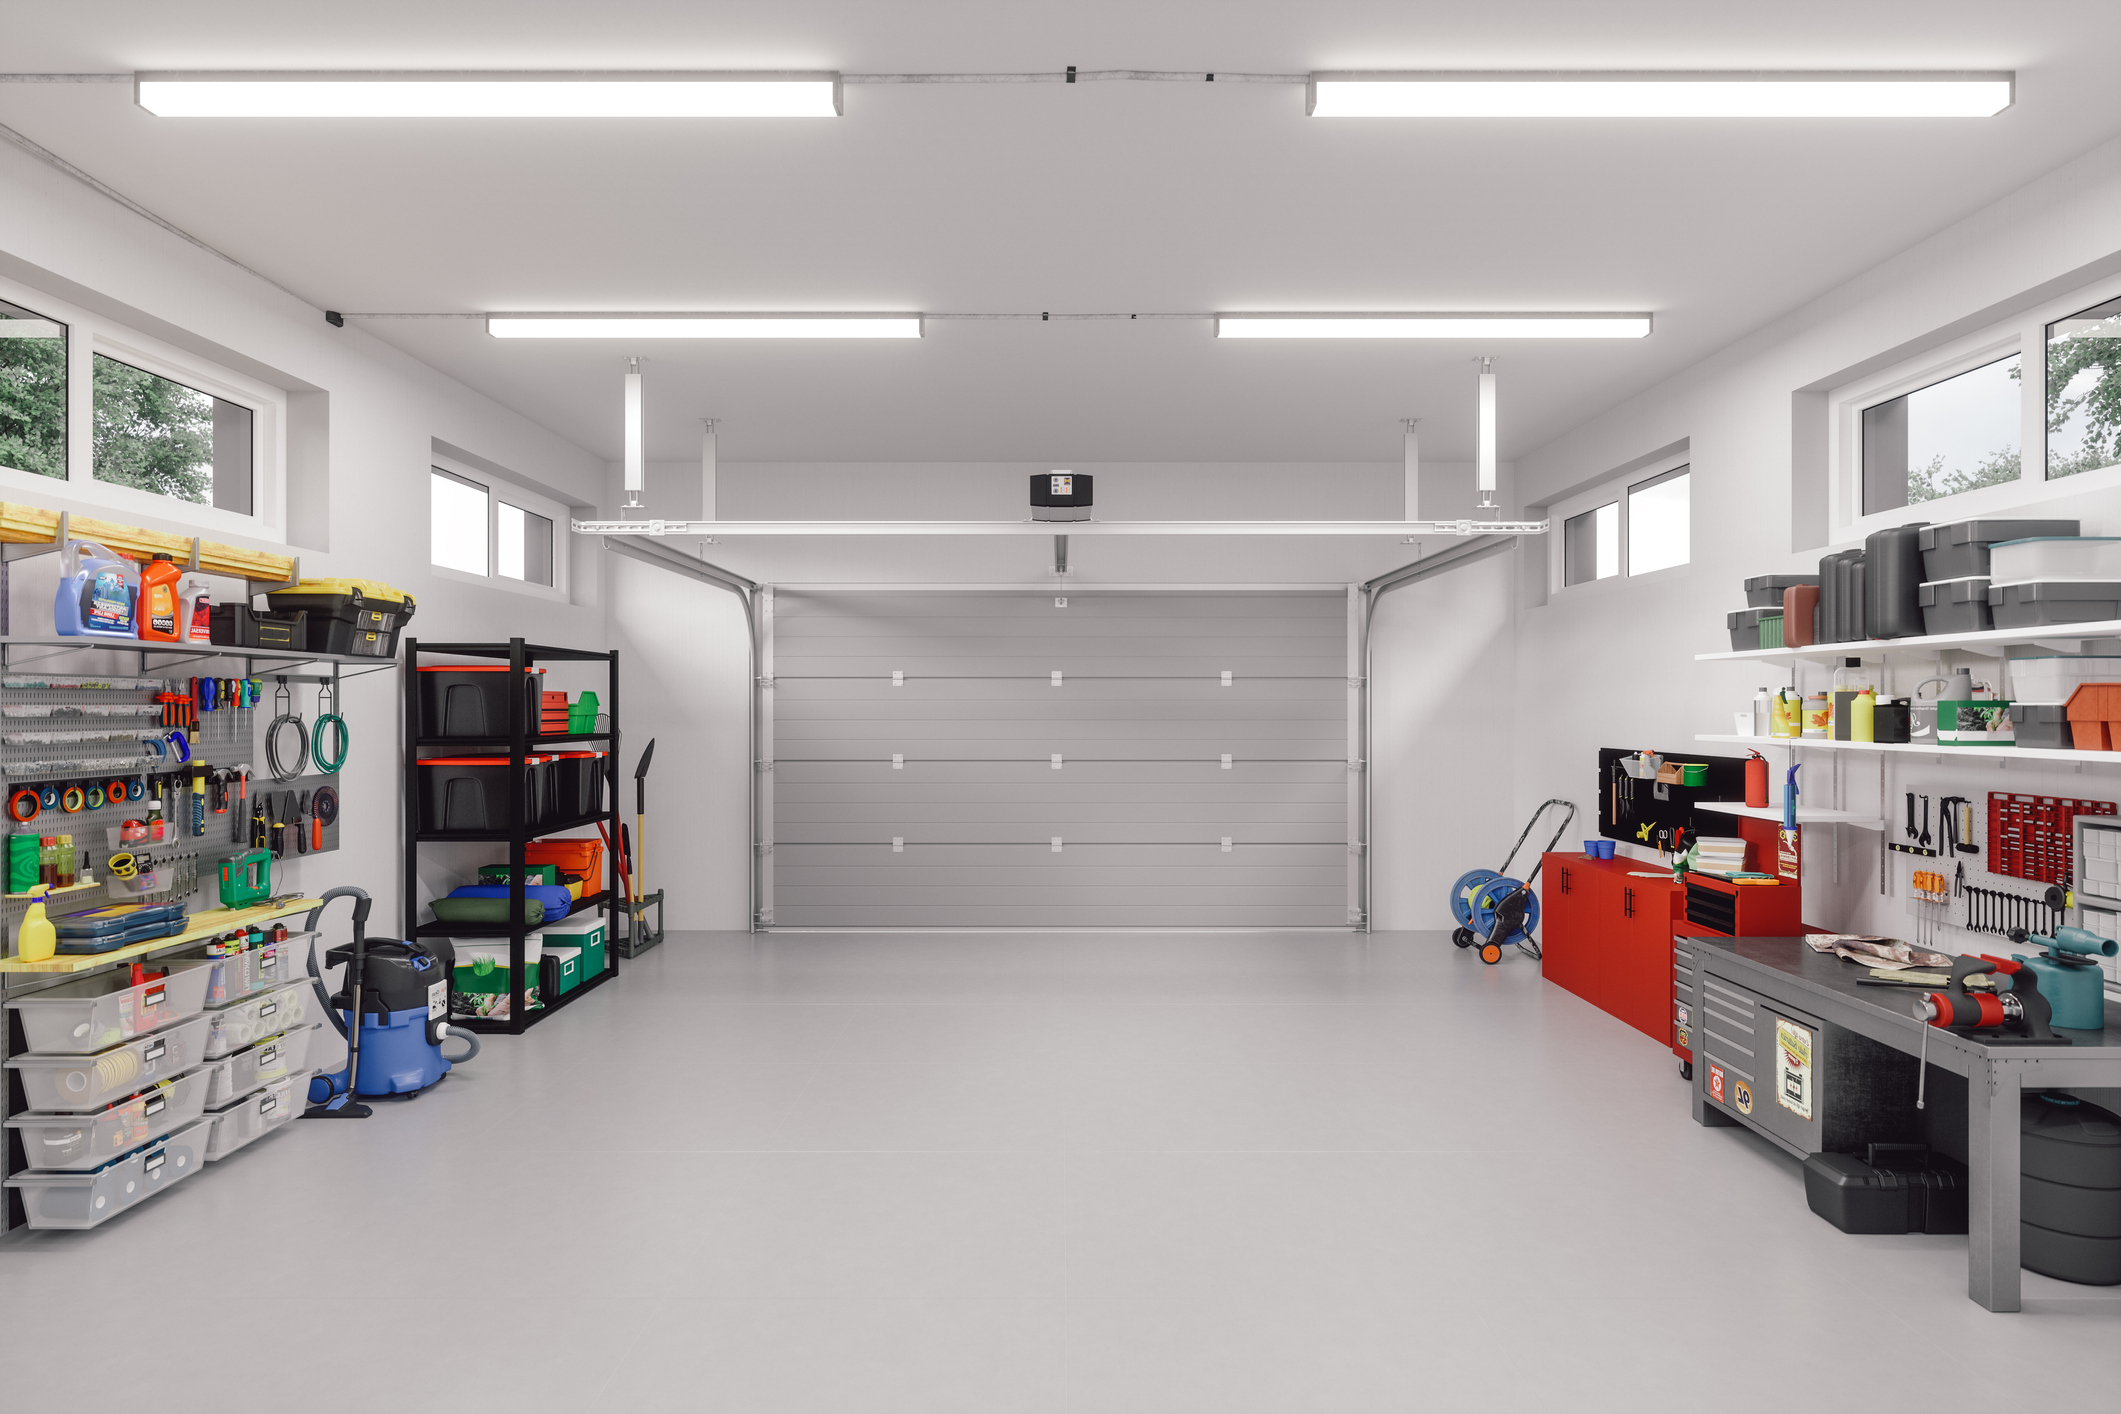 A very clean garage with bright overhead lights.